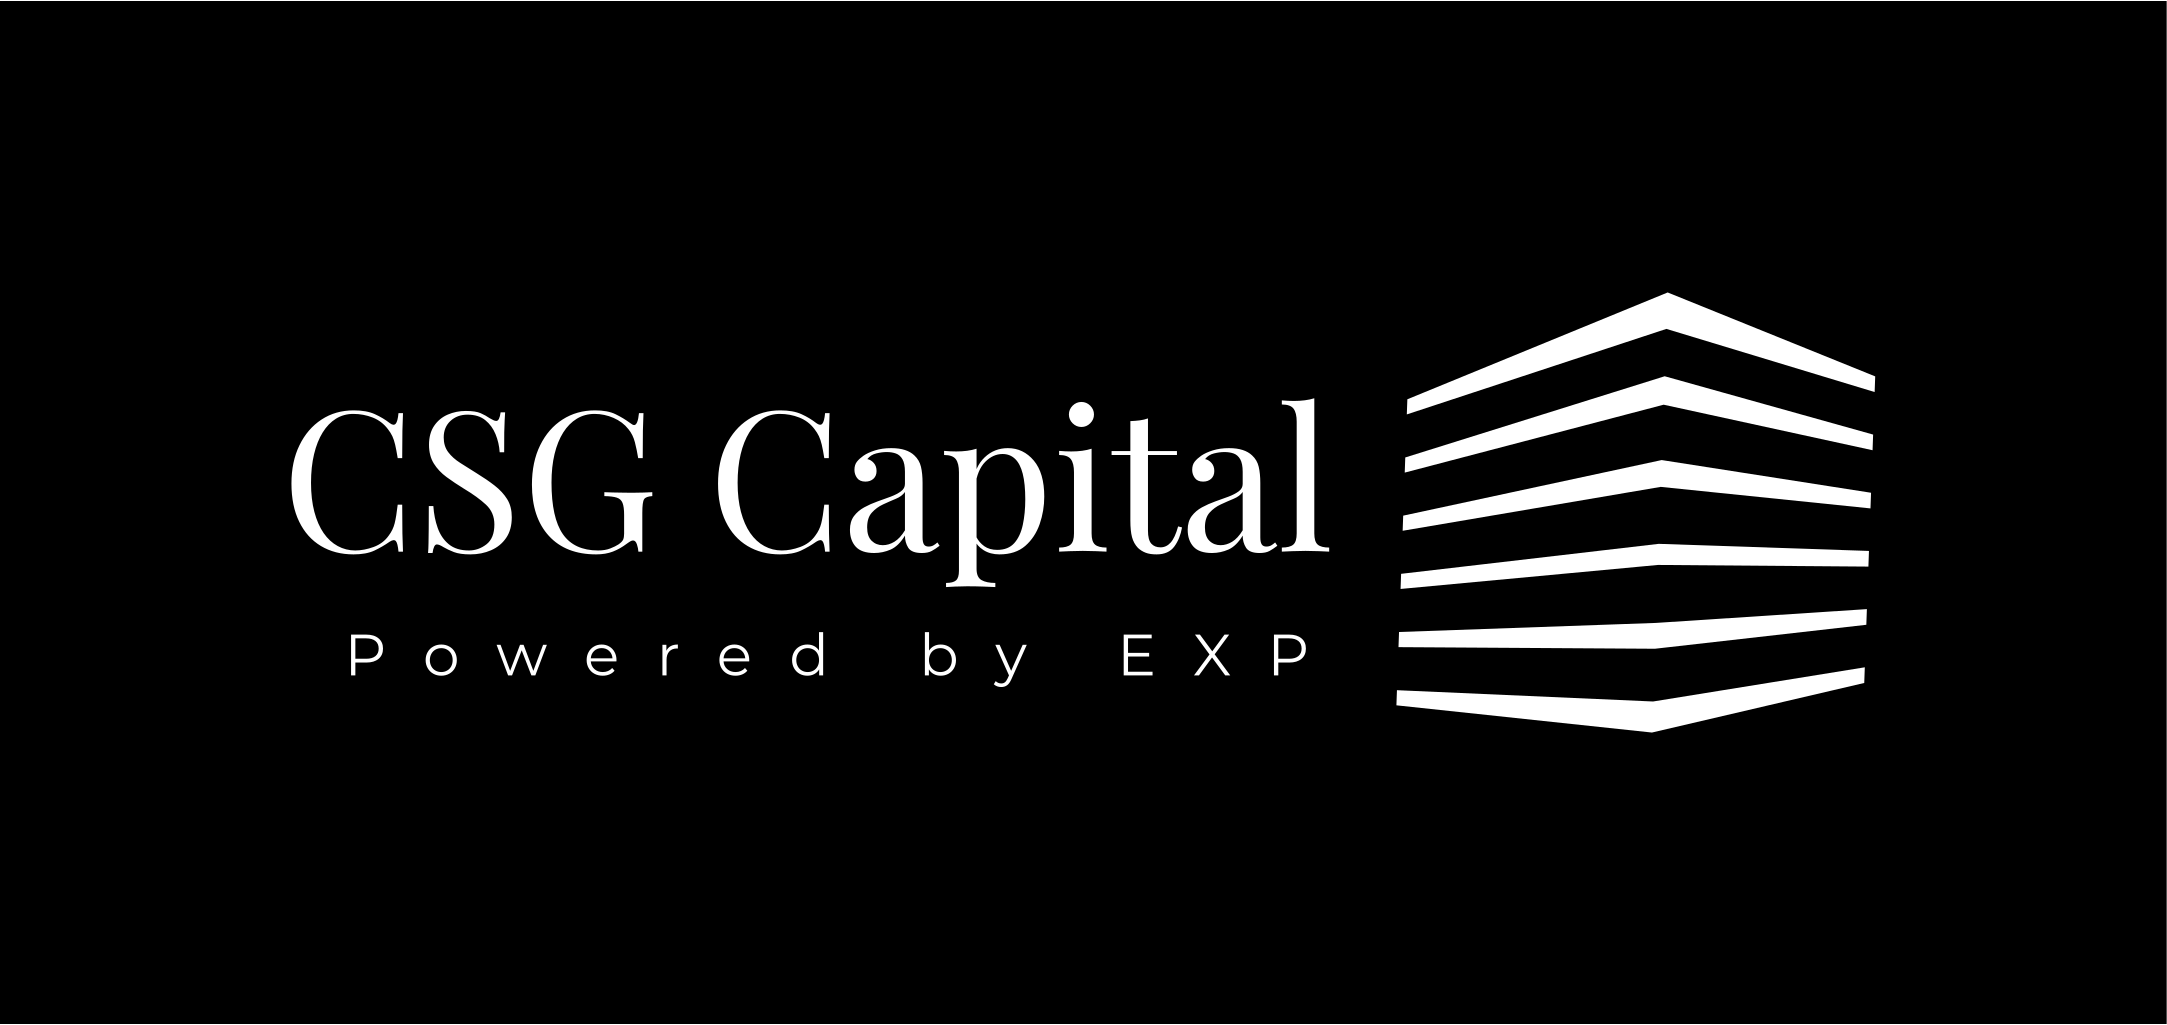 CSG Capital, powered by EXP Commercial